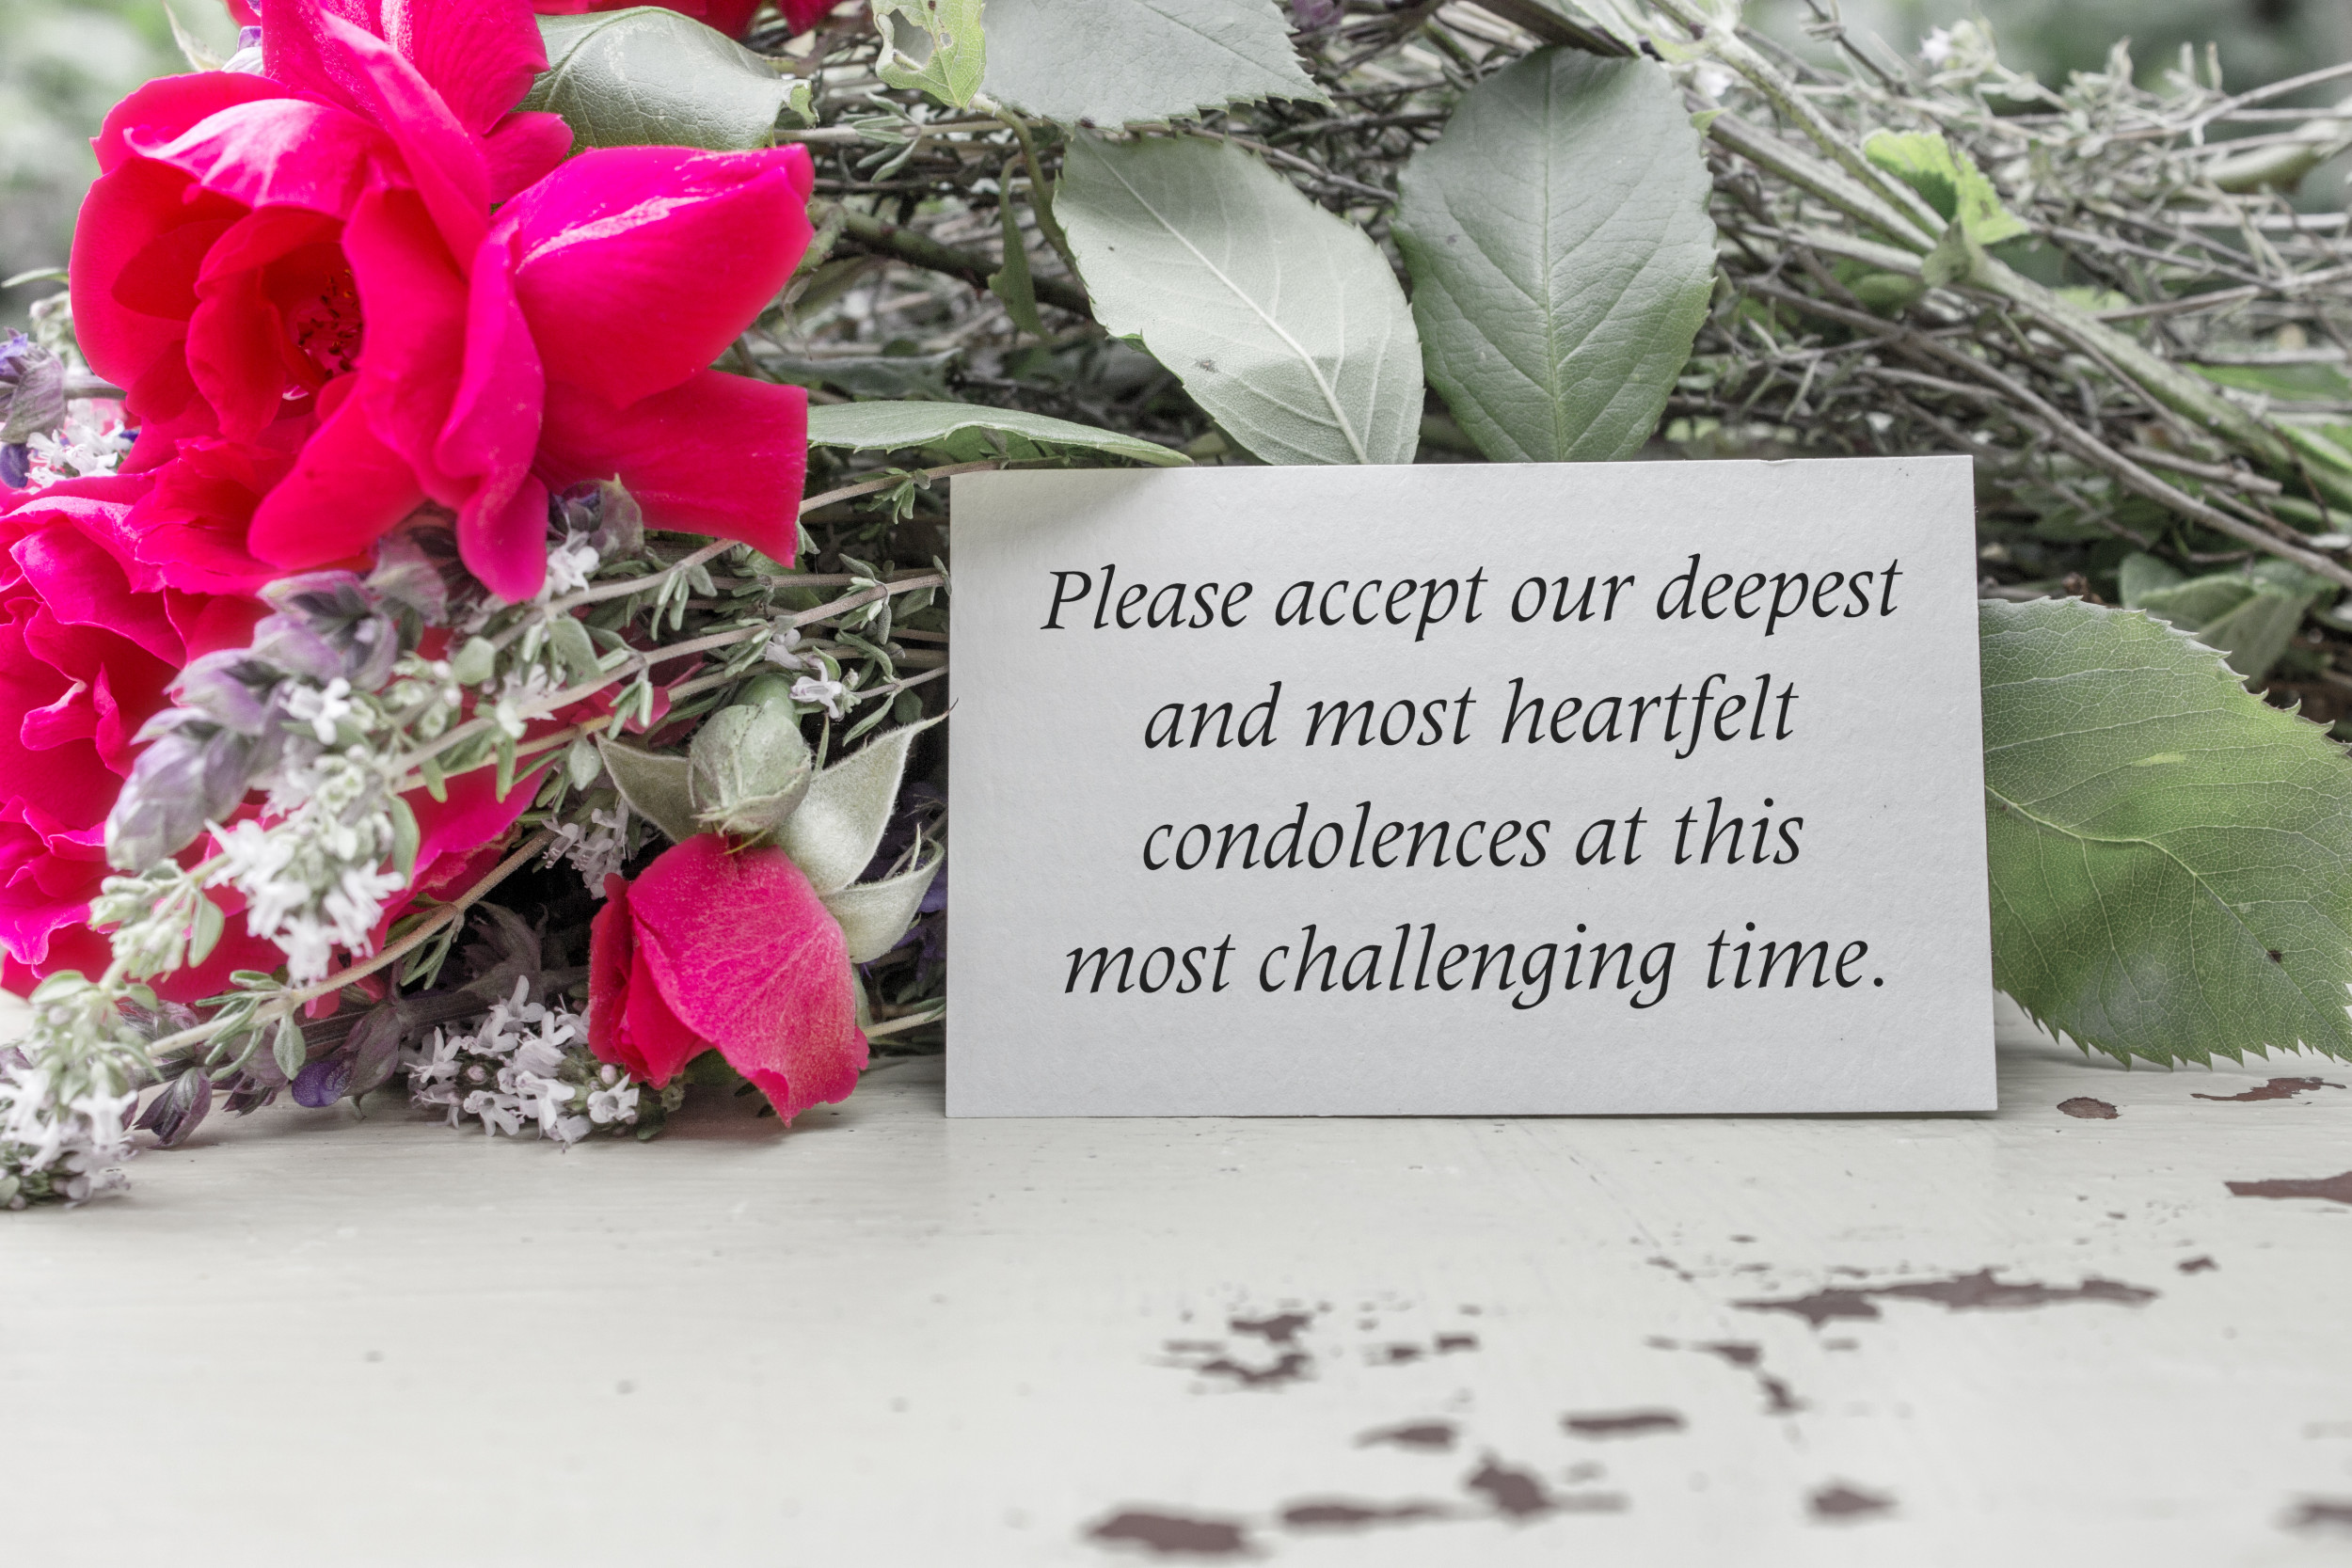 So Very Sorry For Your Loss Twitter Goes Wild For Resignations Using Condolence Cards